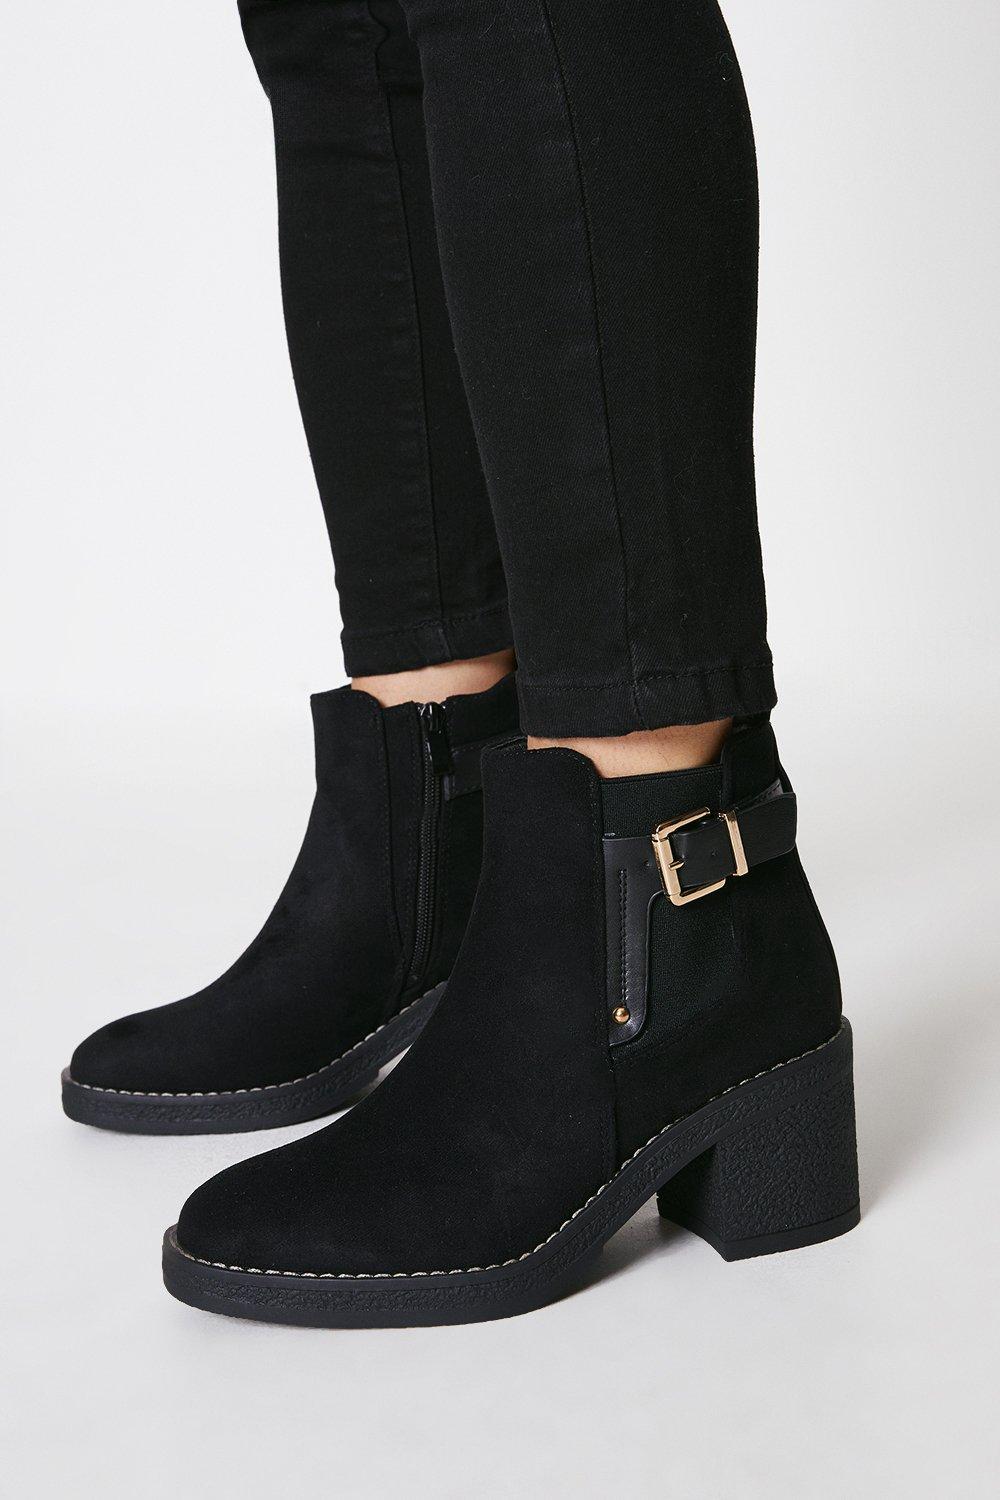 Women's Armour Buckle Mid Heel Ankle Boots - black - 5